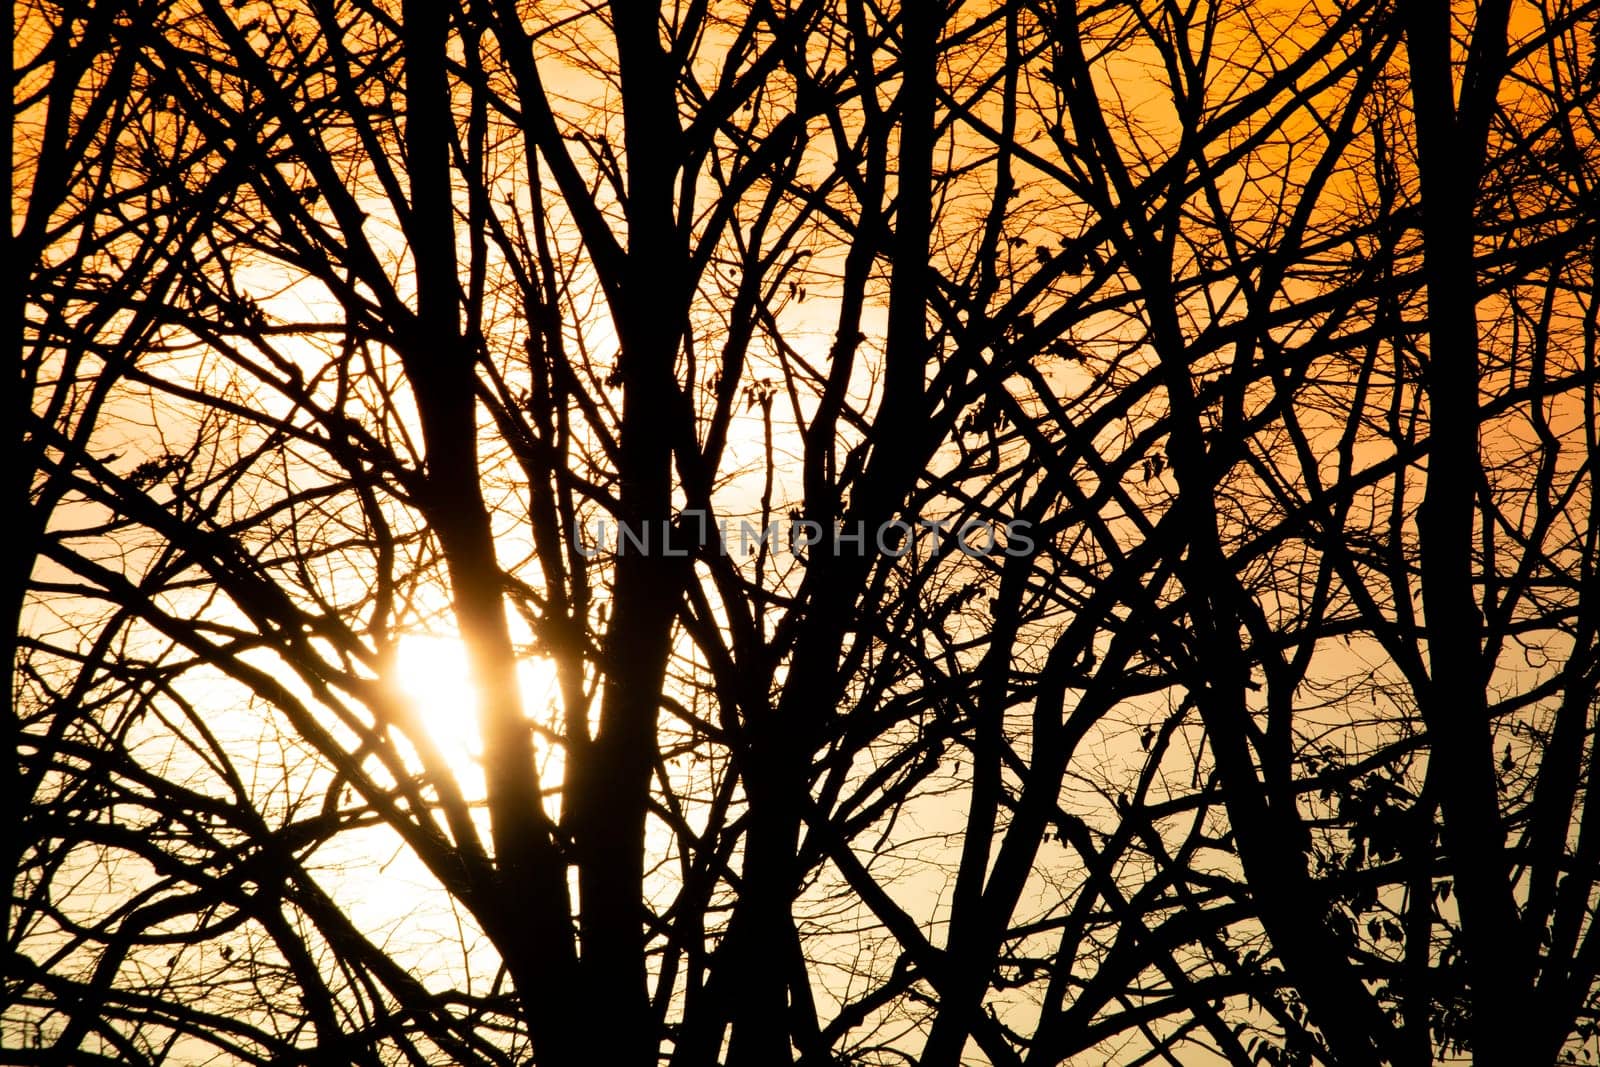 Photographic documentation of the sunset among the trees  by fotografiche.eu